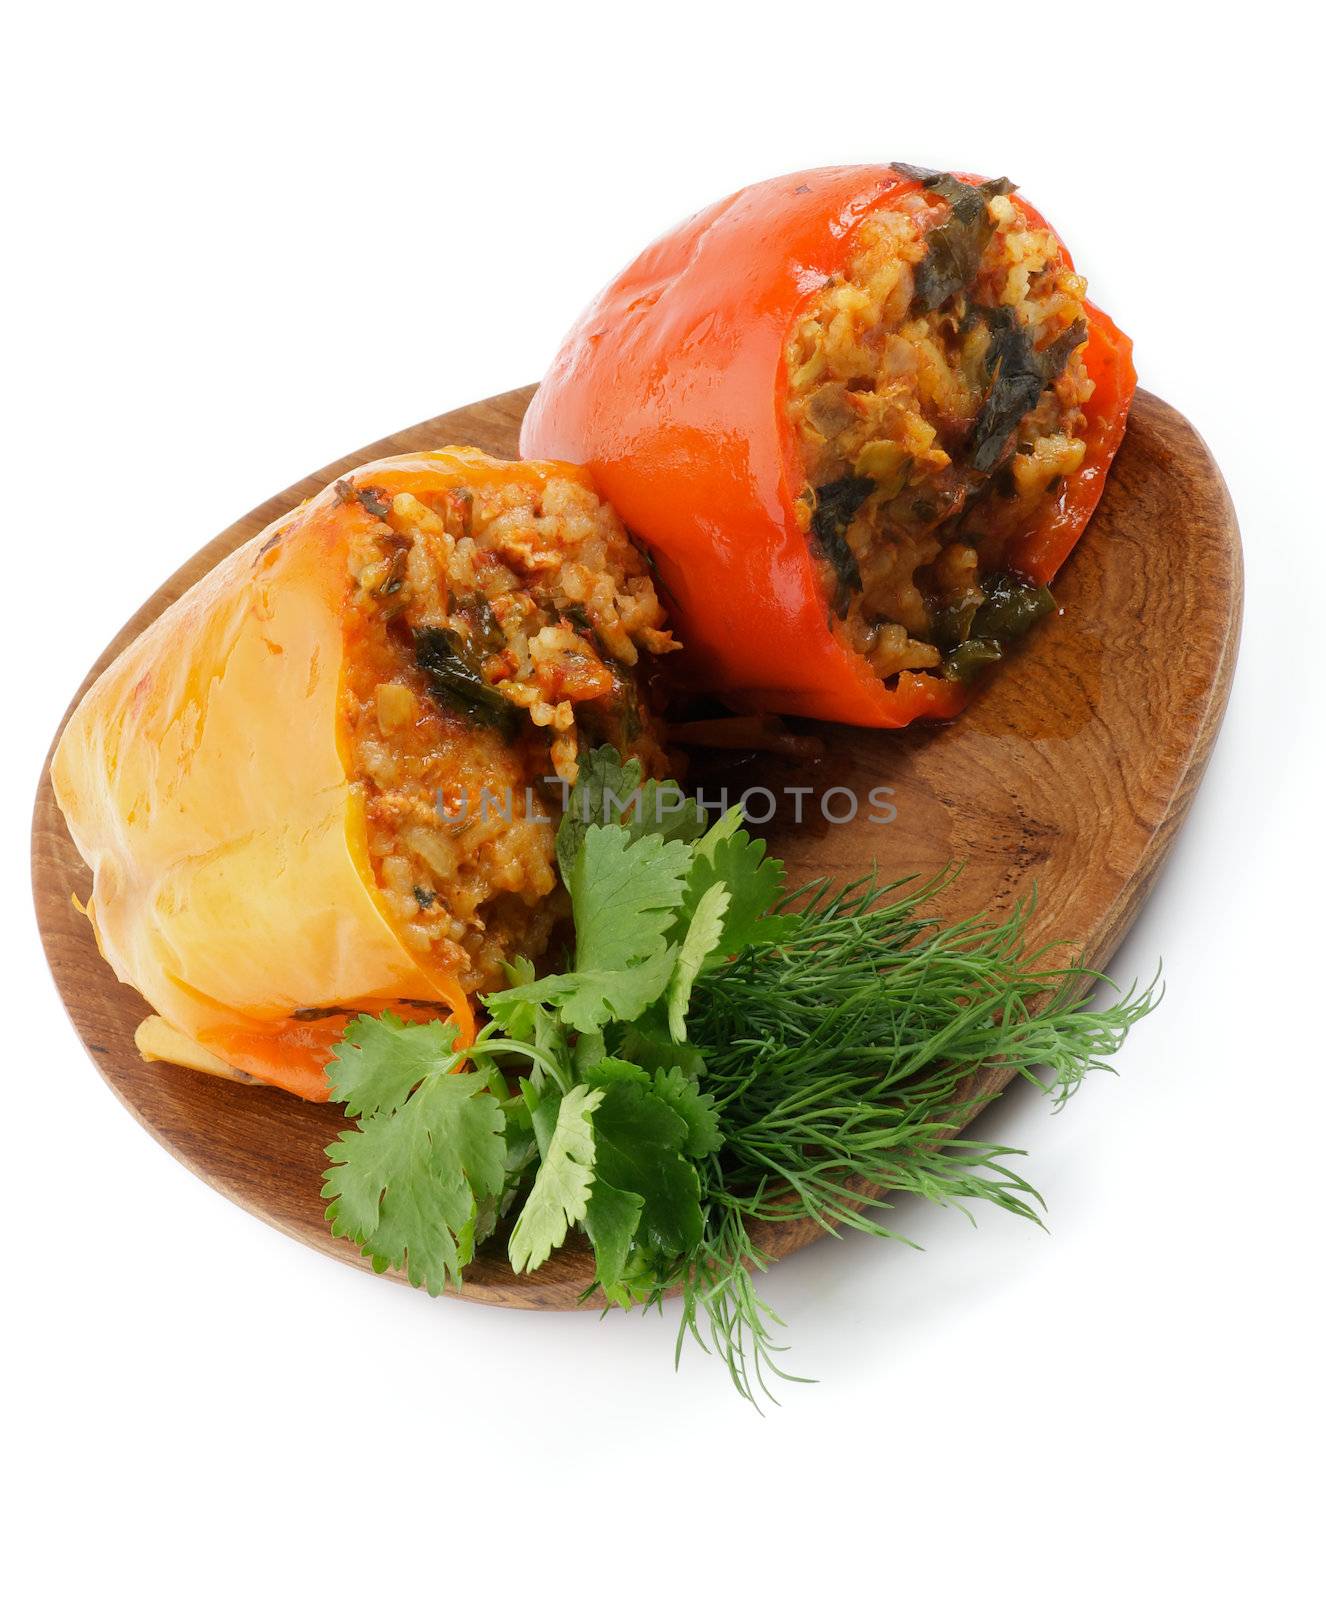 Stuffed Red and Yellow Bell Peppers by zhekos